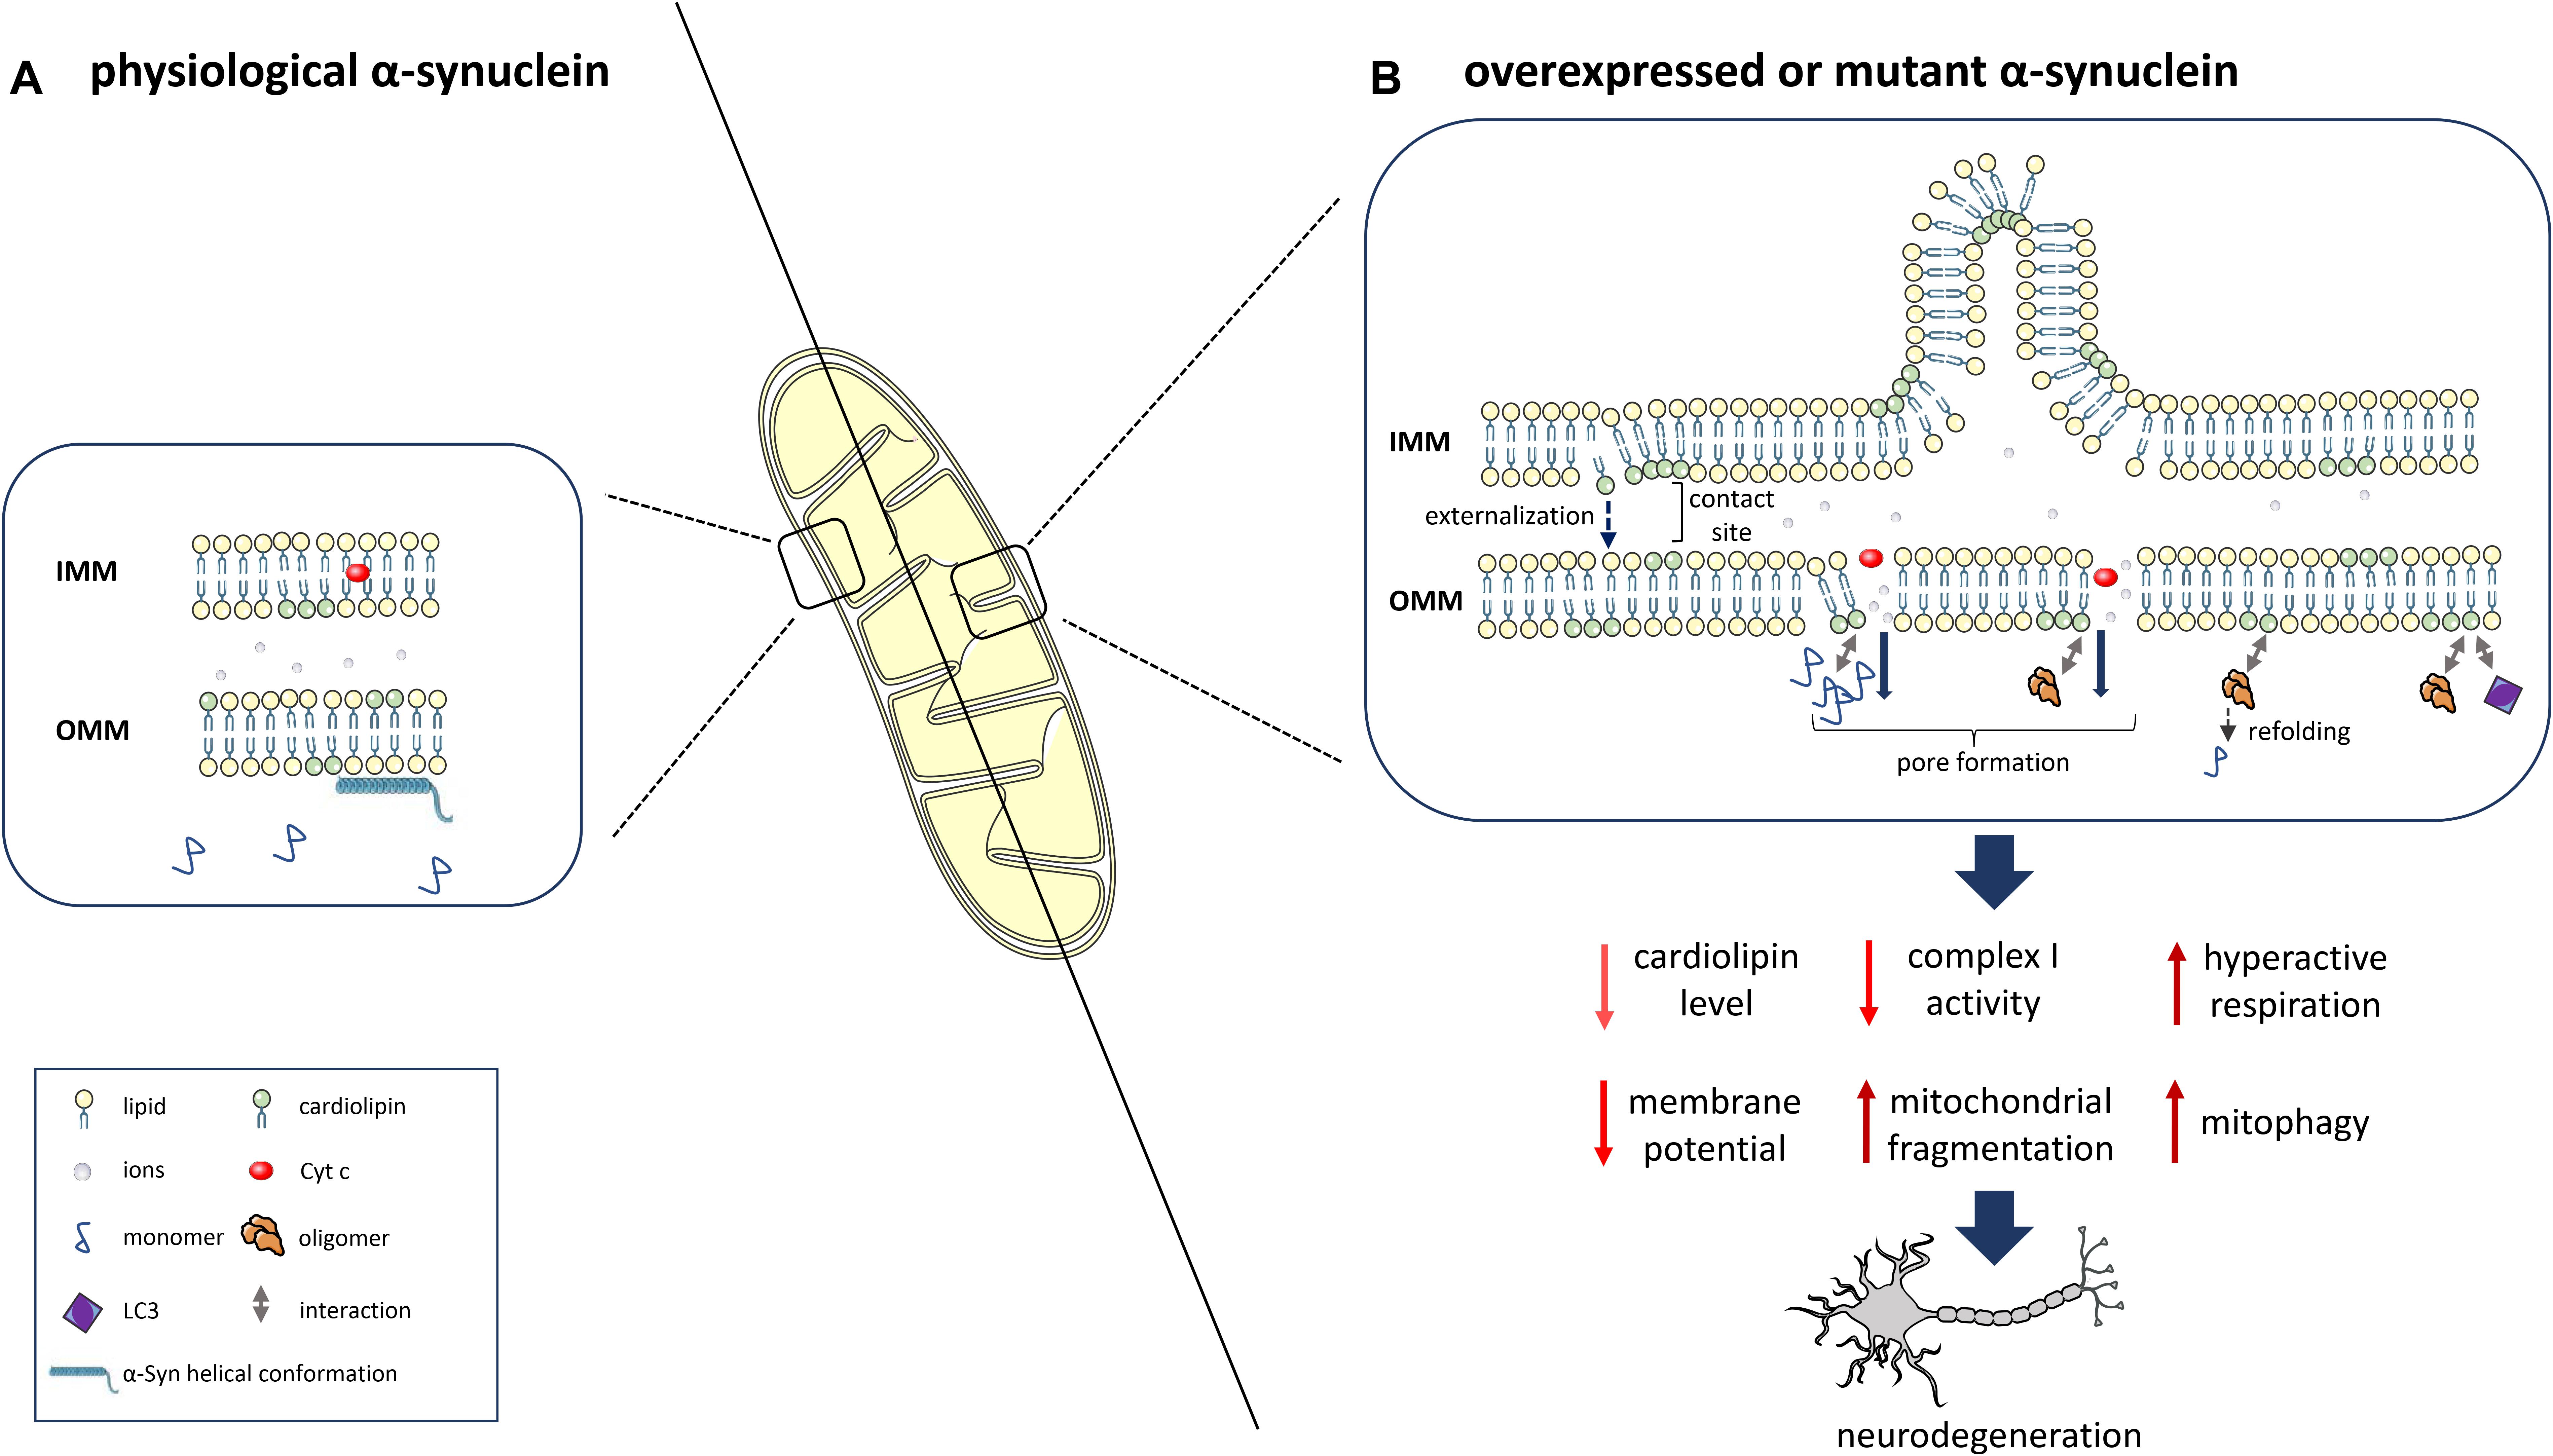 Frontiers Interaction Of Alpha Synuclein With Lipids Mitochondrial Cardiolipin As A Critical Player In The Pathogenesis Of Parkinson S Disease Neuroscience